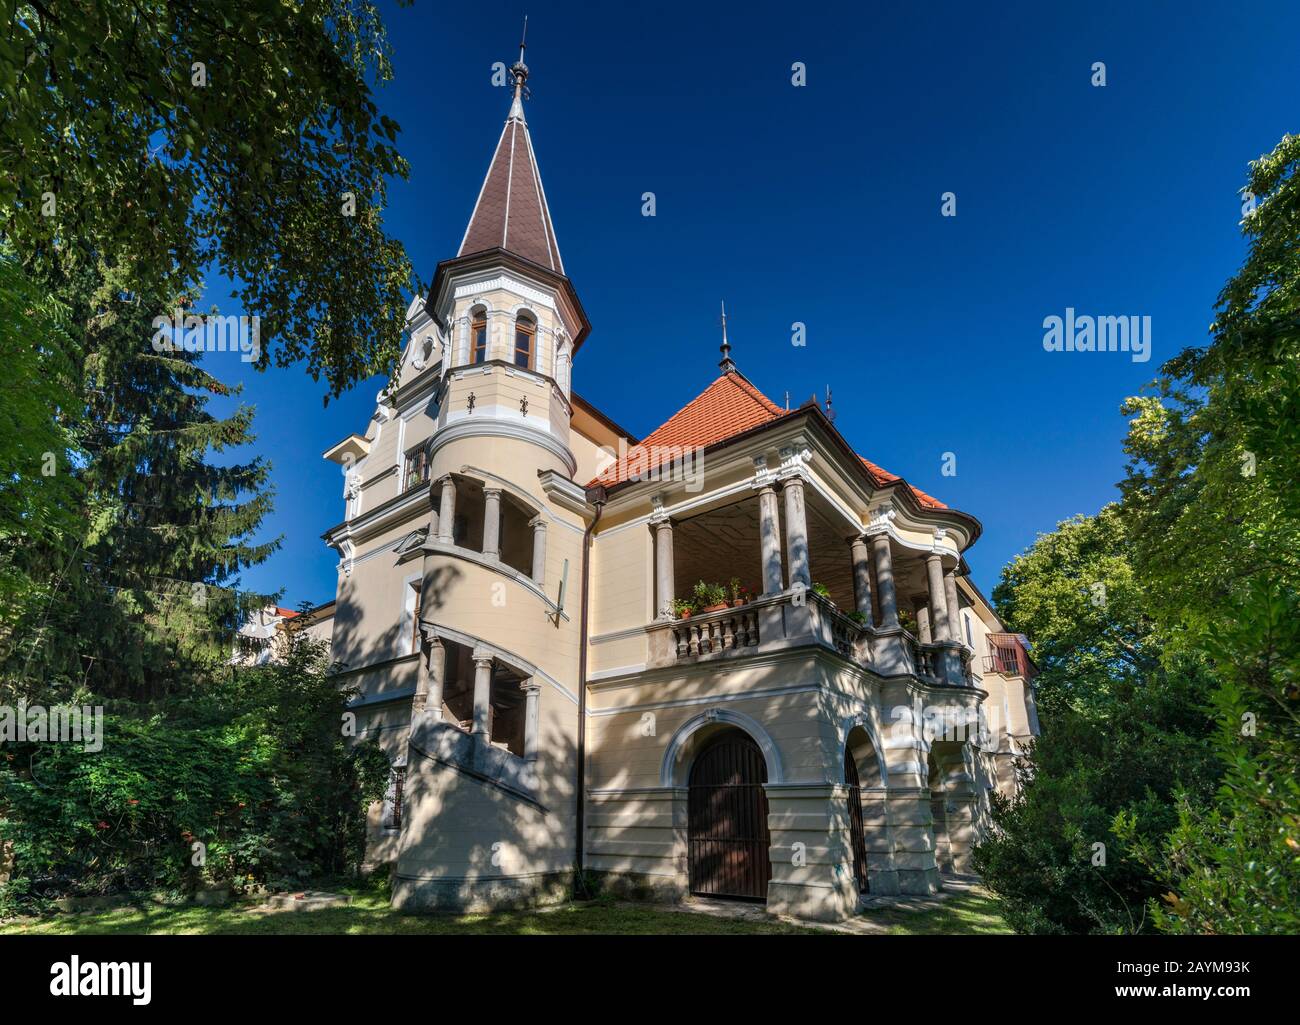 Section of Stupava Castle, 17th century, Renaissance style, now retirement home, in Stupava, Slovakia, Central Europe Stock Photo